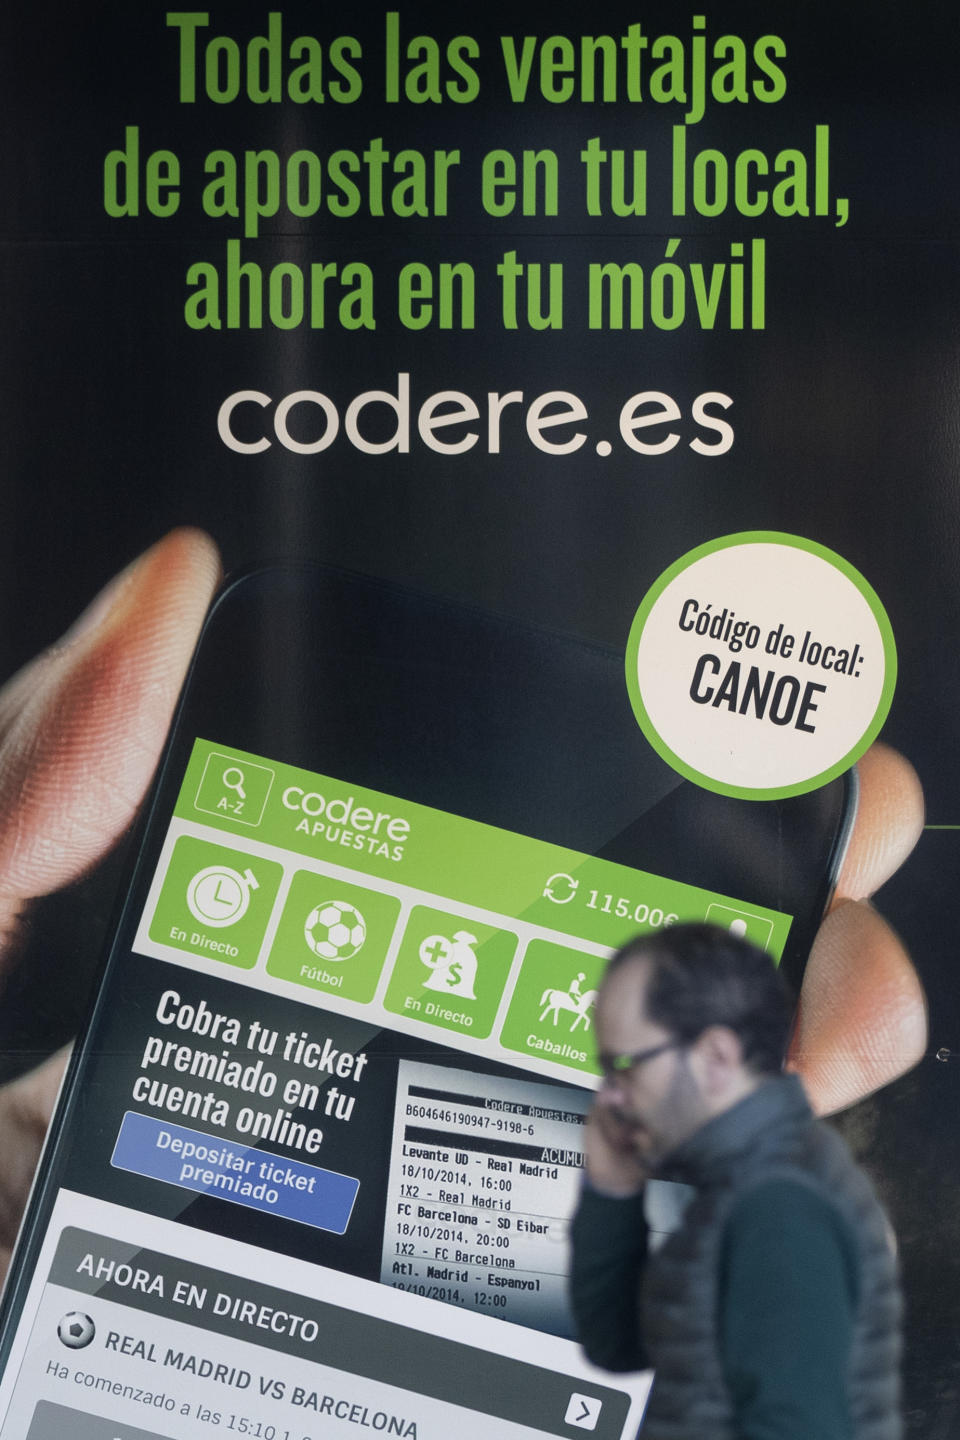 A man walks past an advertisement for online betting on the outside of a betting shop in Madrid, Spain, Friday, Feb. 21, 2020. Spain’s government has announced plans to restrict advertising for on-line betting houses on the Internet, television, and during sporting events. The government said Friday that the law would be the most restrictive in the European Union. (AP Photo/Paul White)